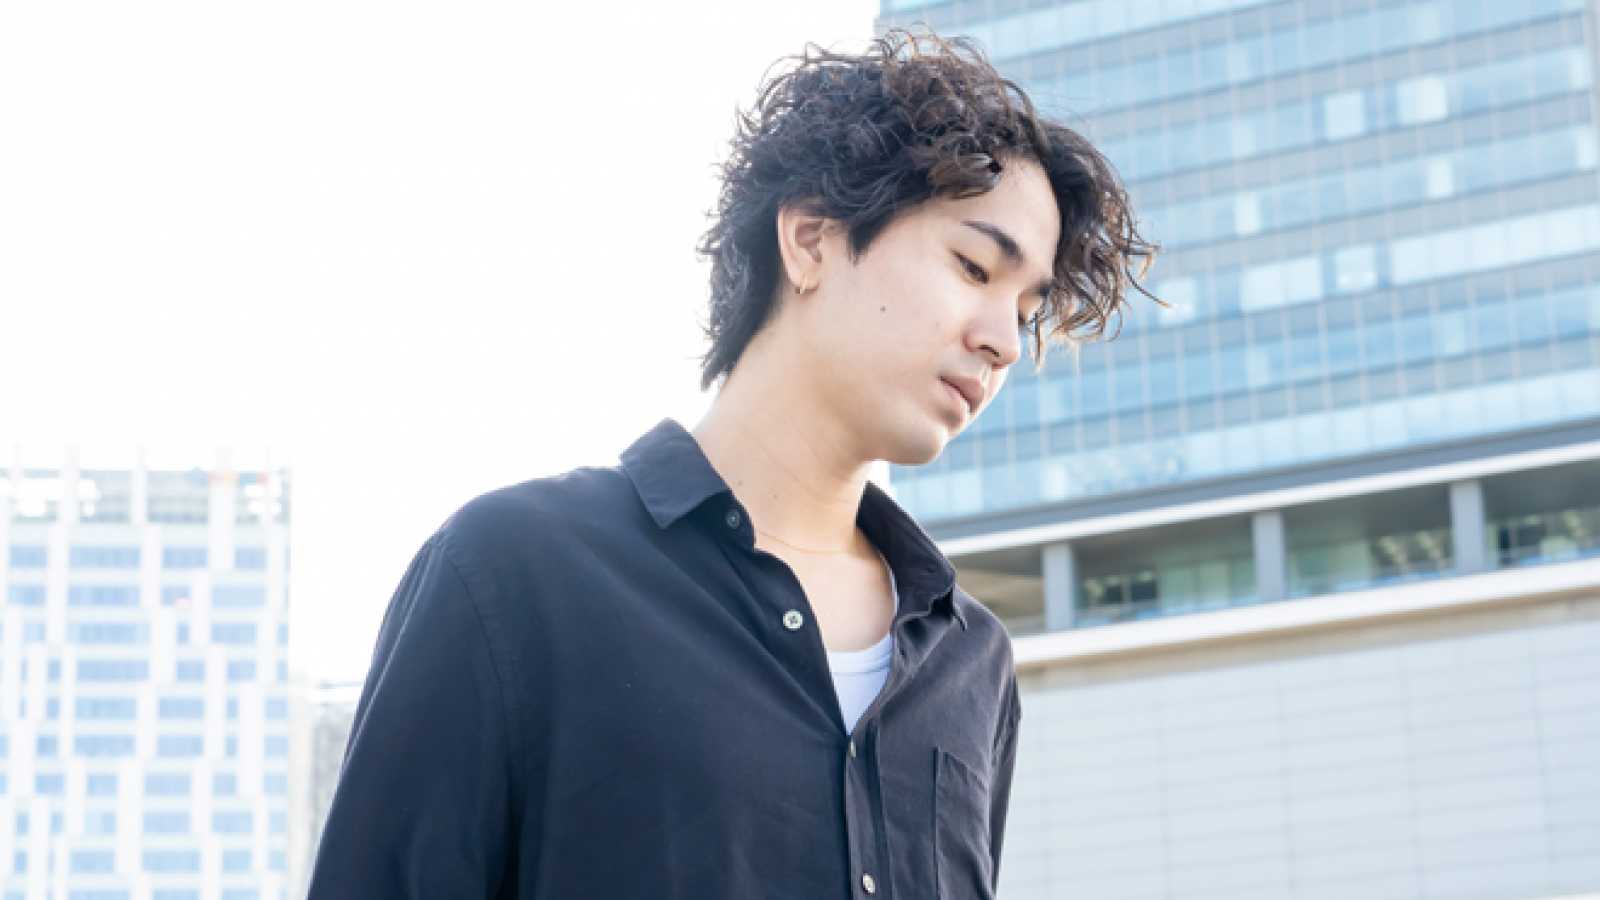 Leonald Releases Music Video for "Sky feat. Taichi Mukai" © MIYA TERRACE. All rights reserved.